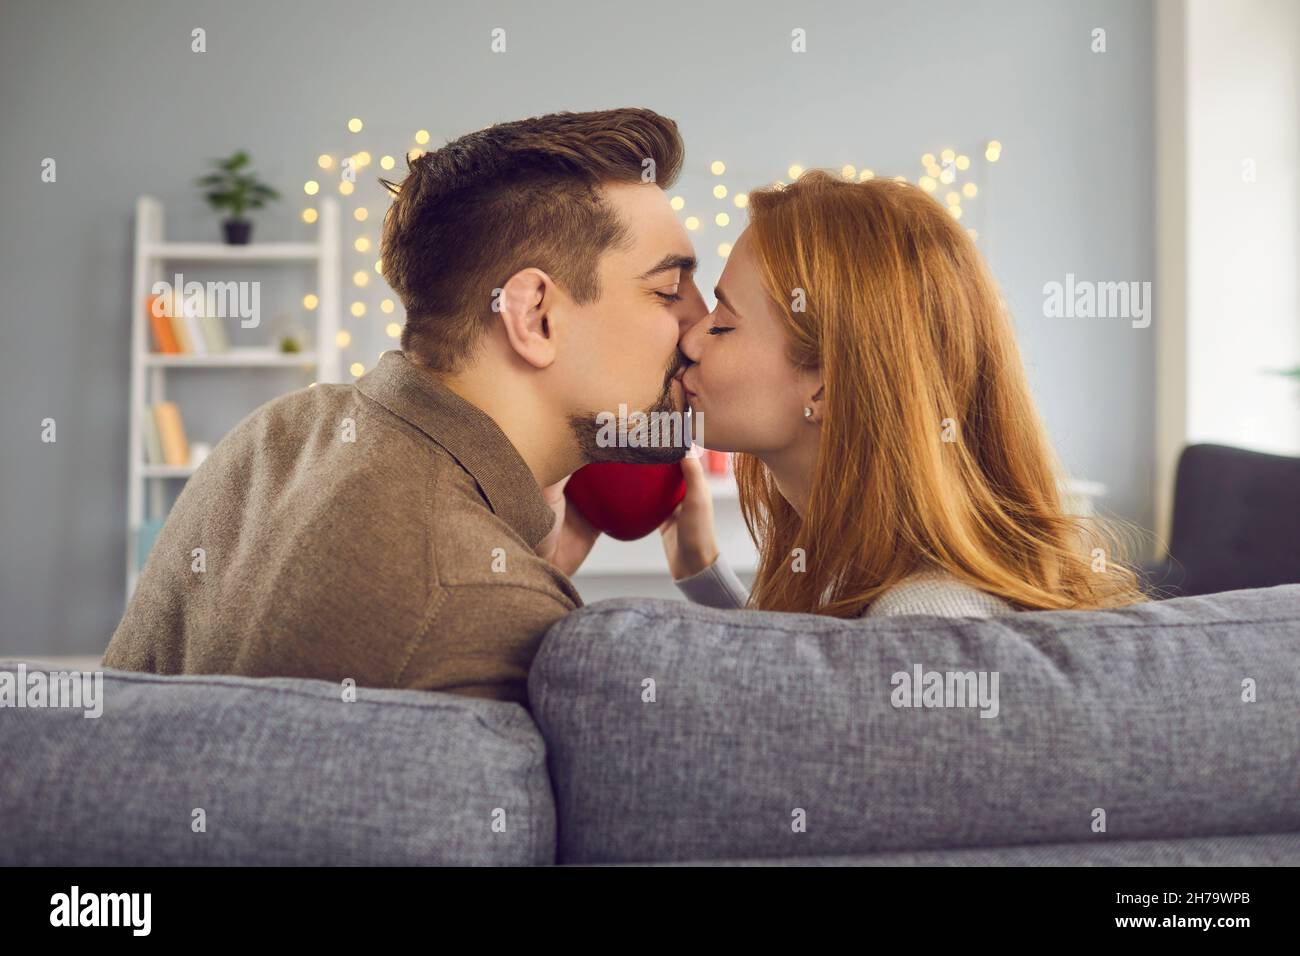 Rear view of a couple kissing and enjoying spending time celebrating Valentine's Day. Stock Photo